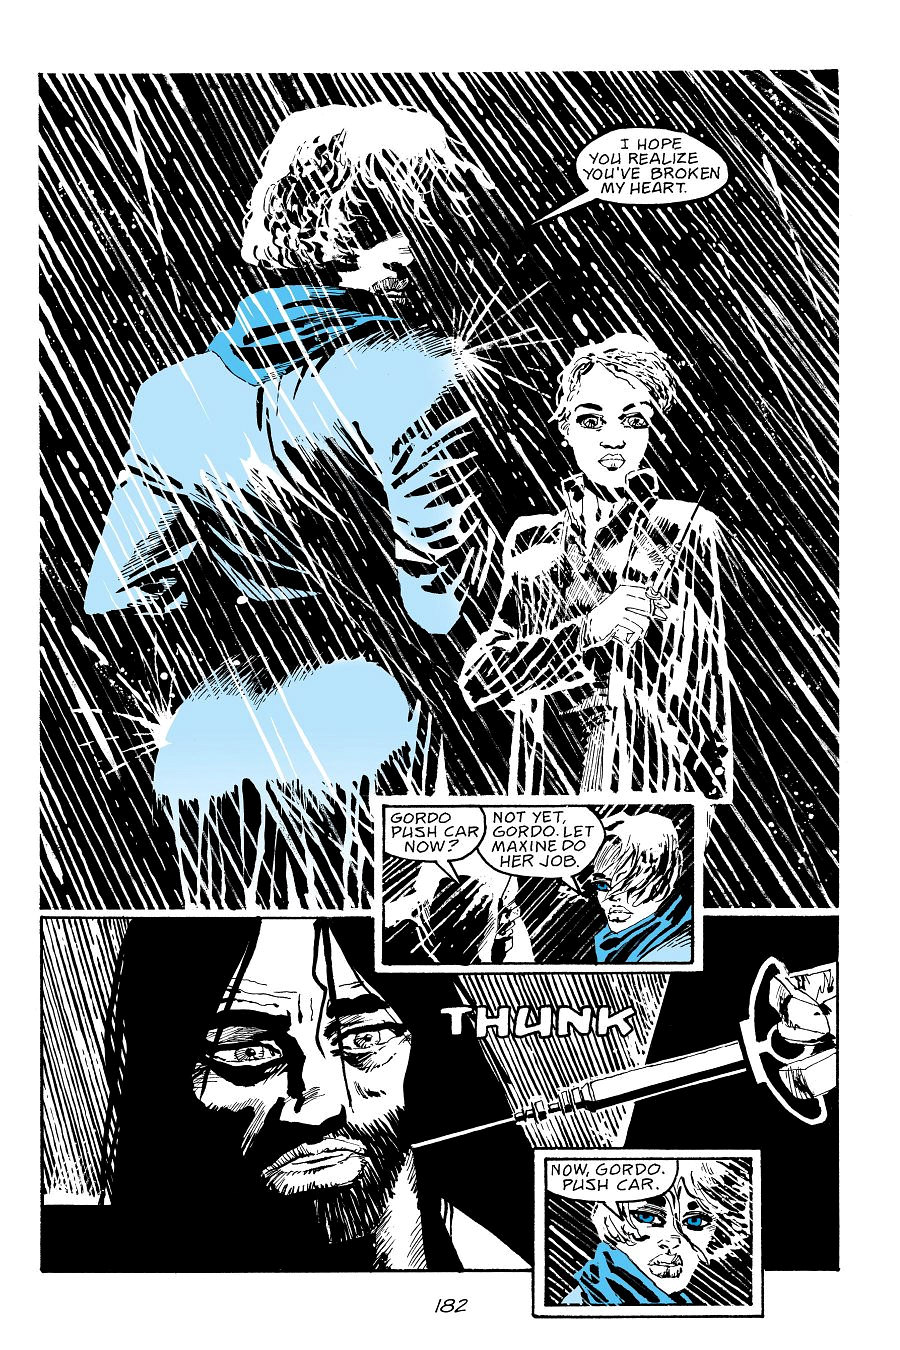 page 182 of sin city 7 hell and back